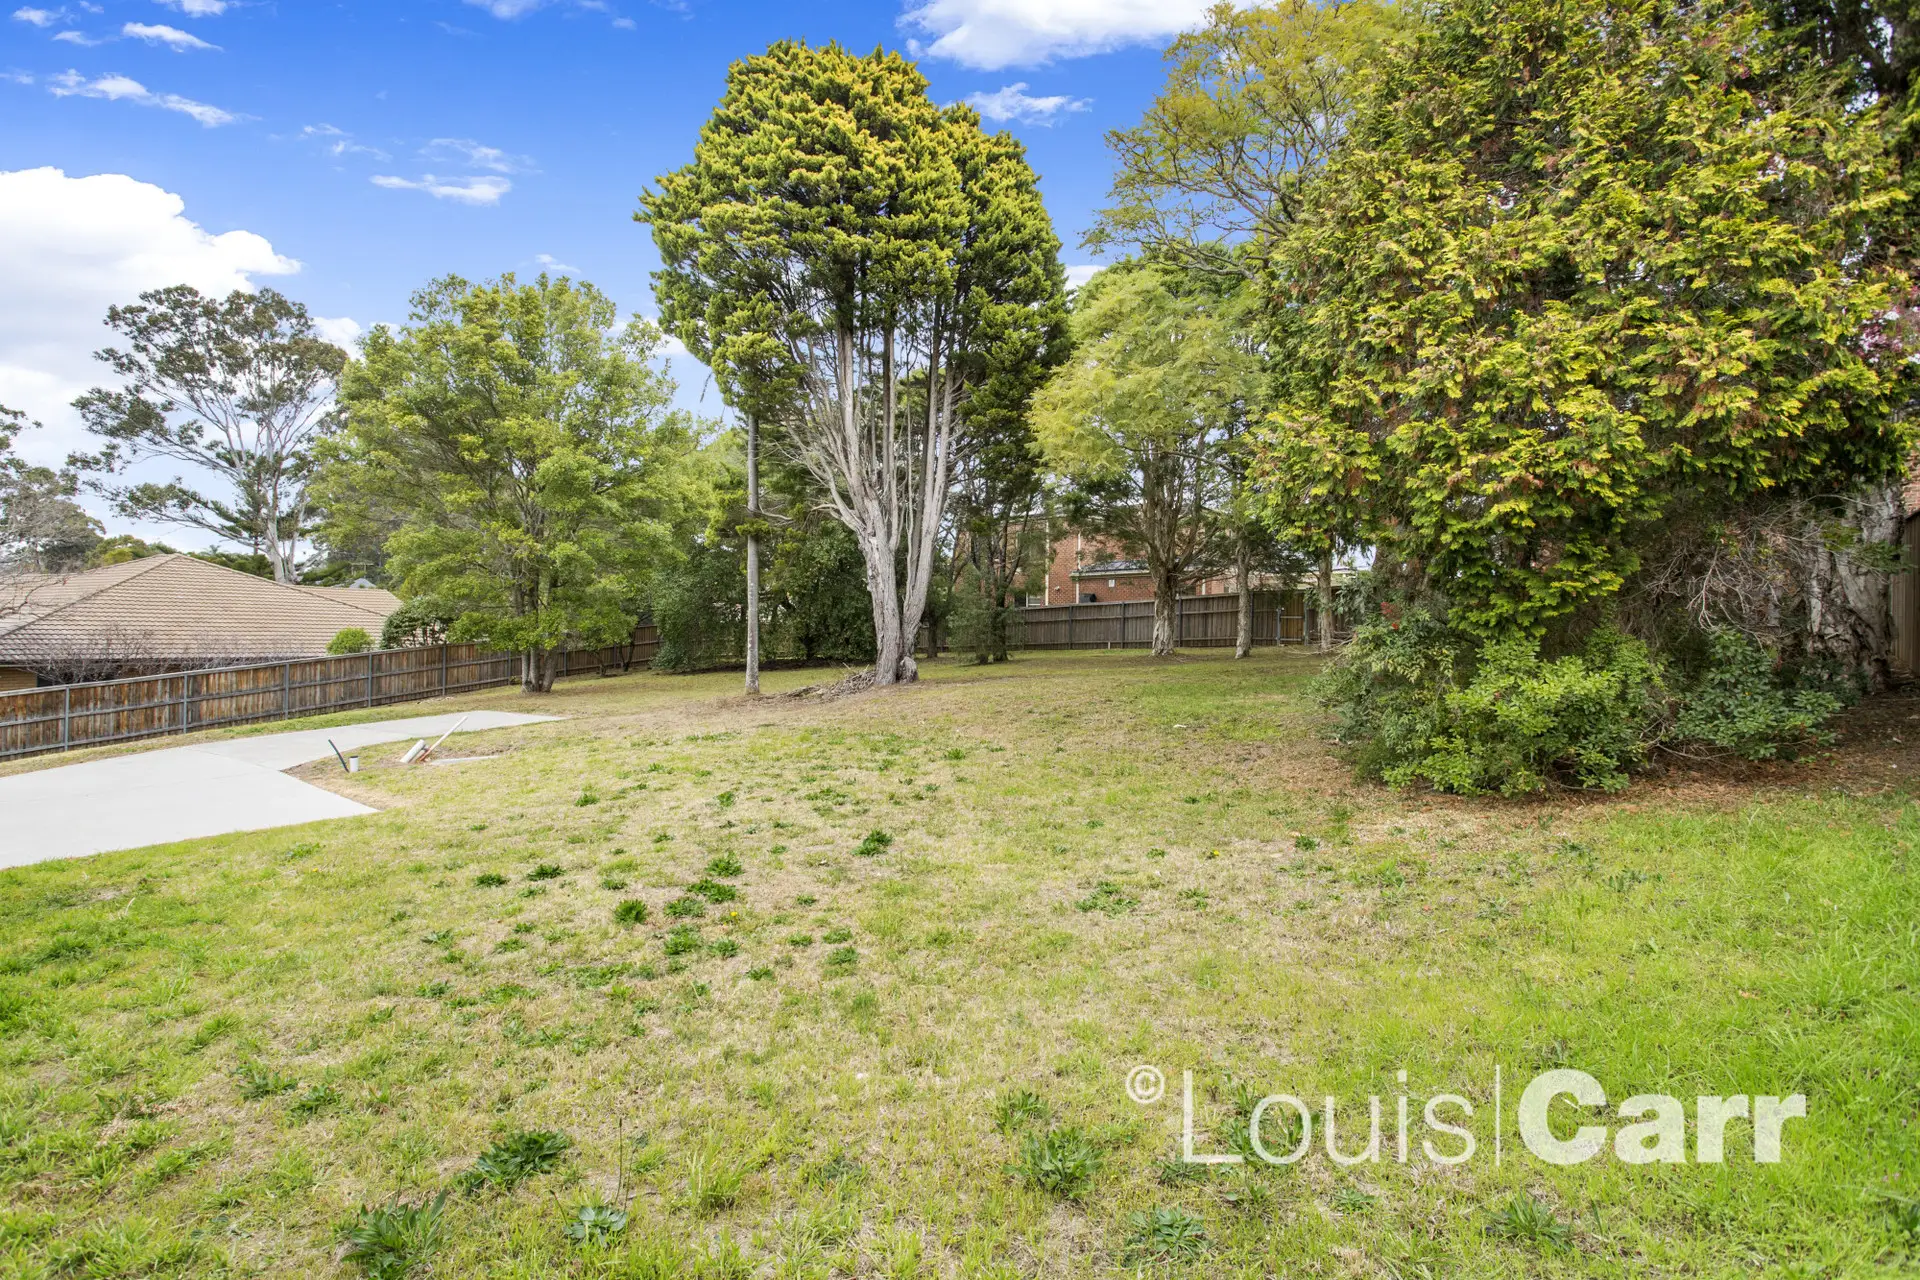 Photo #8: 3A Cherrybrook Road, West Pennant Hills - Sold by Louis Carr Real Estate